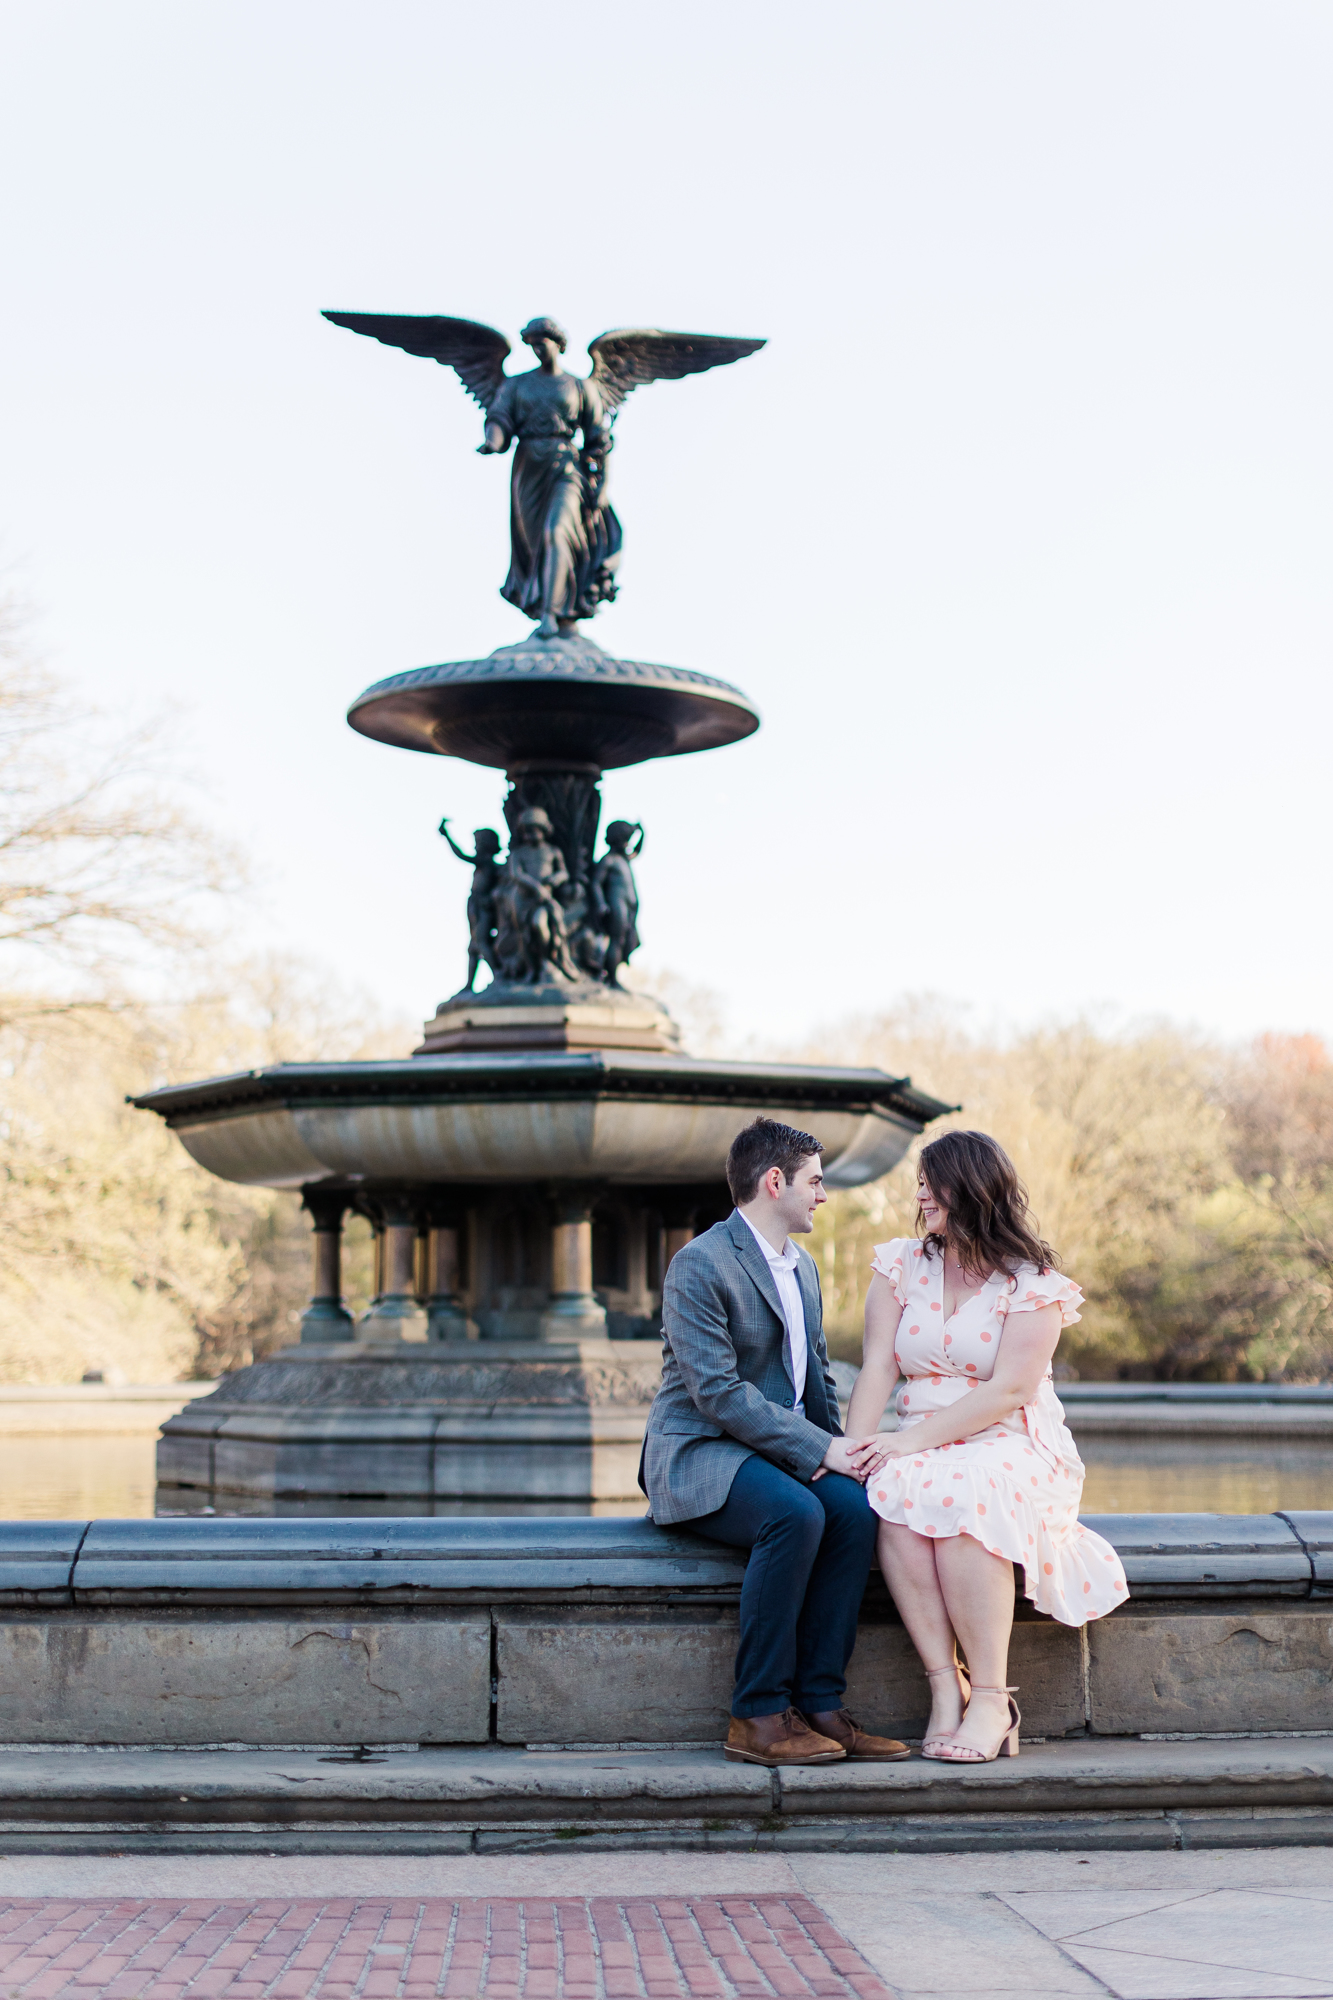 Candid Spring Engagement Photography in NYC